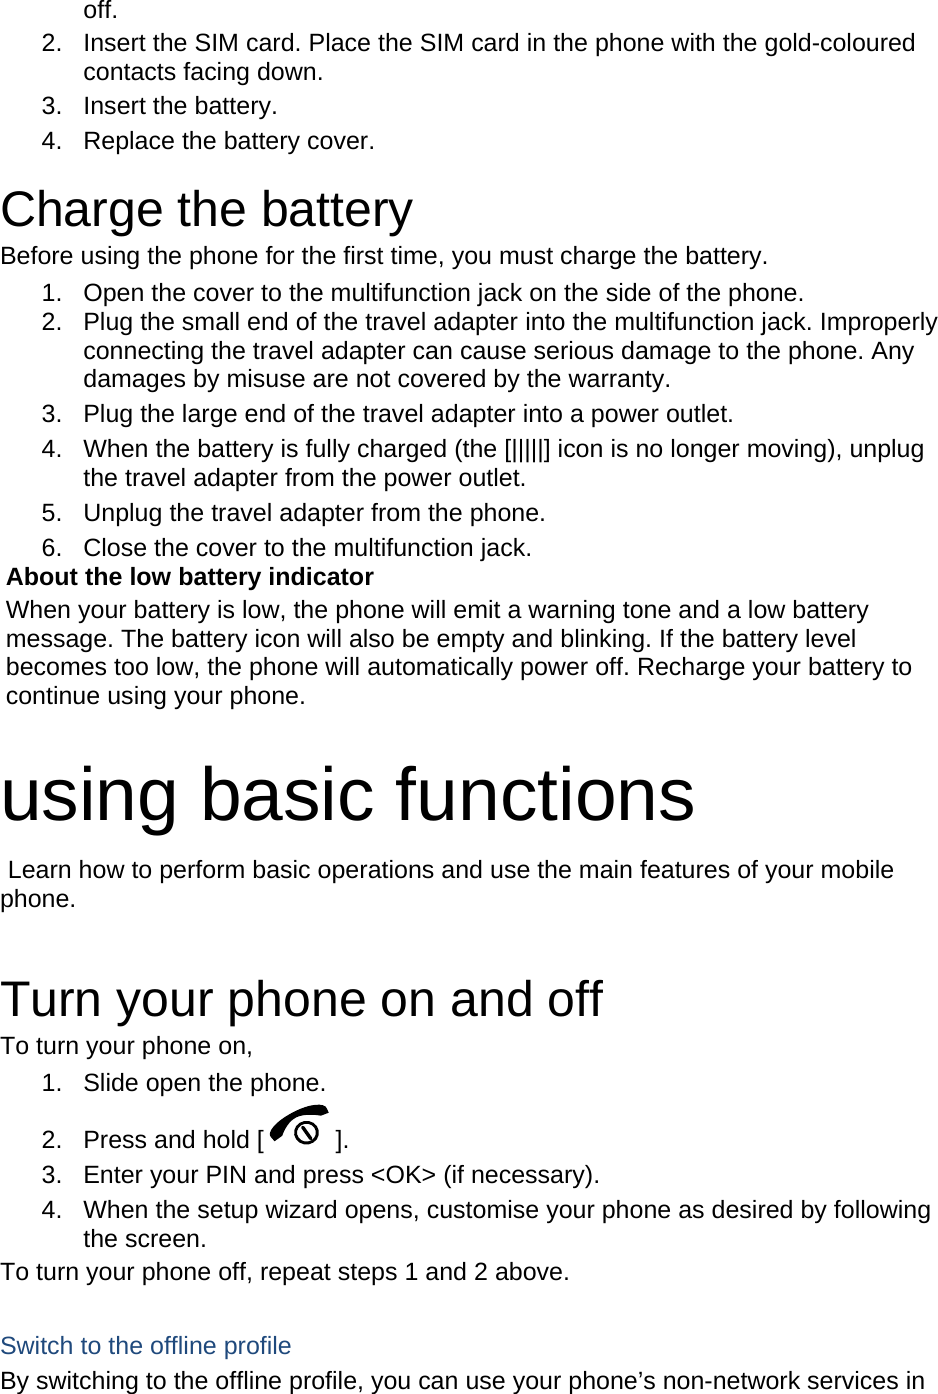 off. 2.  Insert the SIM card. Place the SIM card in the phone with the gold-coloured contacts facing down. 3. Insert the battery. 4.  Replace the battery cover.  Charge the battery Before using the phone for the first time, you must charge the battery. 1.  Open the cover to the multifunction jack on the side of the phone. 2.  Plug the small end of the travel adapter into the multifunction jack. Improperly connecting the travel adapter can cause serious damage to the phone. Any damages by misuse are not covered by the warranty. 3.  Plug the large end of the travel adapter into a power outlet. 4.  When the battery is fully charged (the [|||||] icon is no longer moving), unplug the travel adapter from the power outlet. 5.  Unplug the travel adapter from the phone. 6.  Close the cover to the multifunction jack. About the low battery indicator When your battery is low, the phone will emit a warning tone and a low battery message. The battery icon will also be empty and blinking. If the battery level becomes too low, the phone will automatically power off. Recharge your battery to continue using your phone.  using basic functions  Learn how to perform basic operations and use the main features of your mobile phone.   Turn your phone on and off To turn your phone on, 1.  Slide open the phone. 2.  Press and hold [ ]. 3.  Enter your PIN and press &lt;OK&gt; (if necessary). 4.  When the setup wizard opens, customise your phone as desired by following the screen. To turn your phone off, repeat steps 1 and 2 above.  Switch to the offline profile By switching to the offline profile, you can use your phone’s non-network services in 